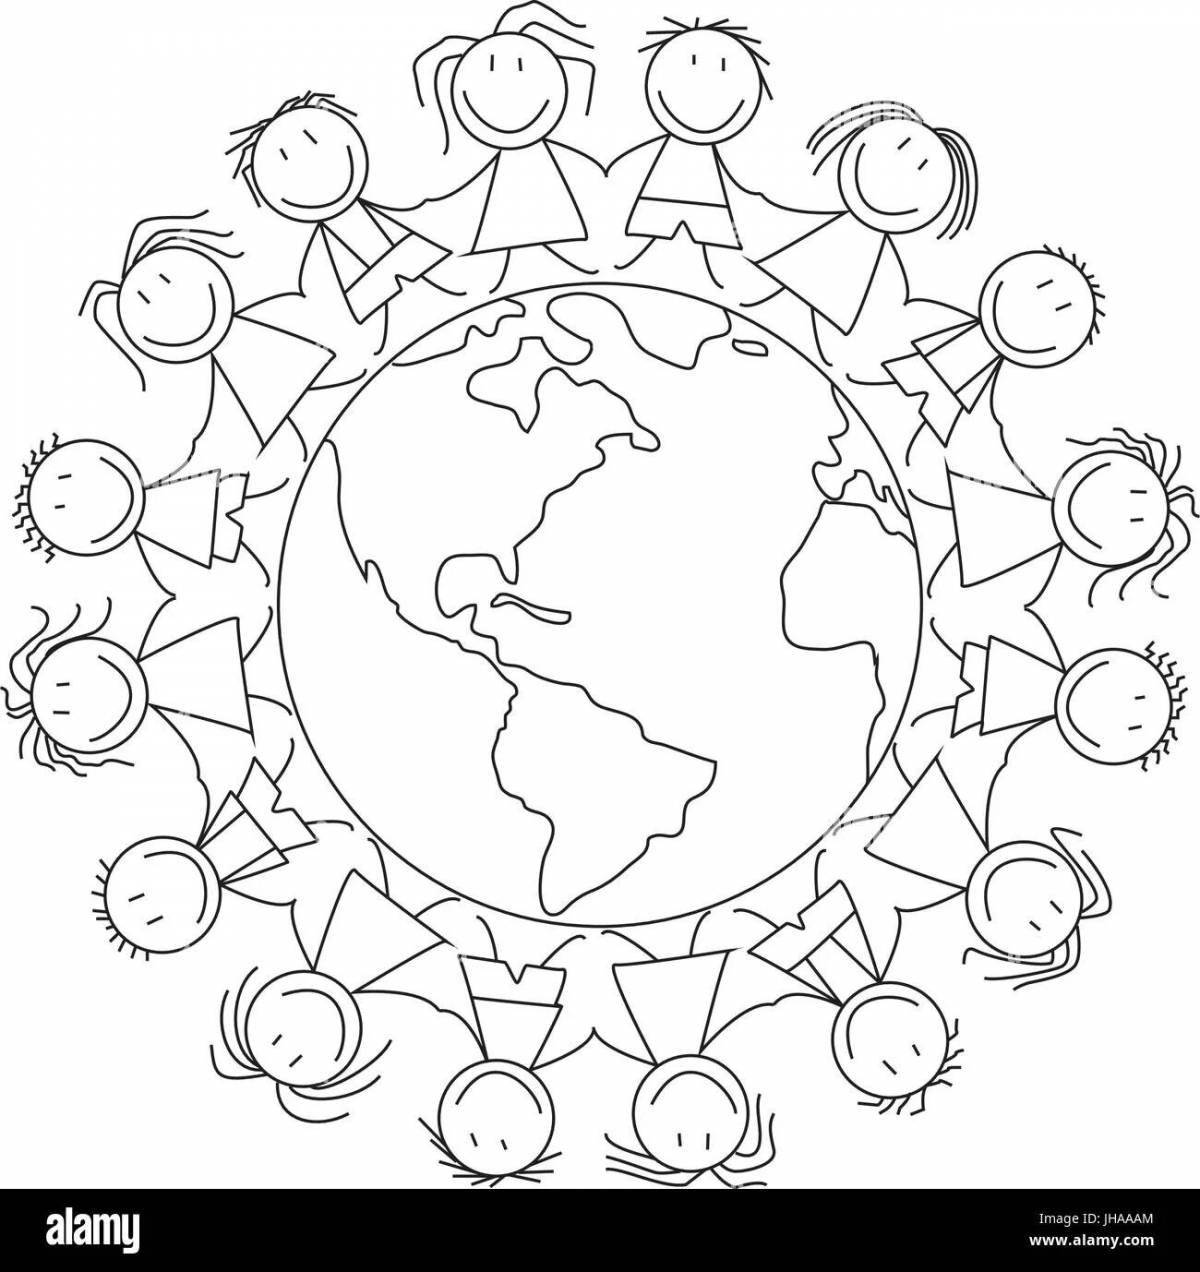 Coloring page wild world on earth